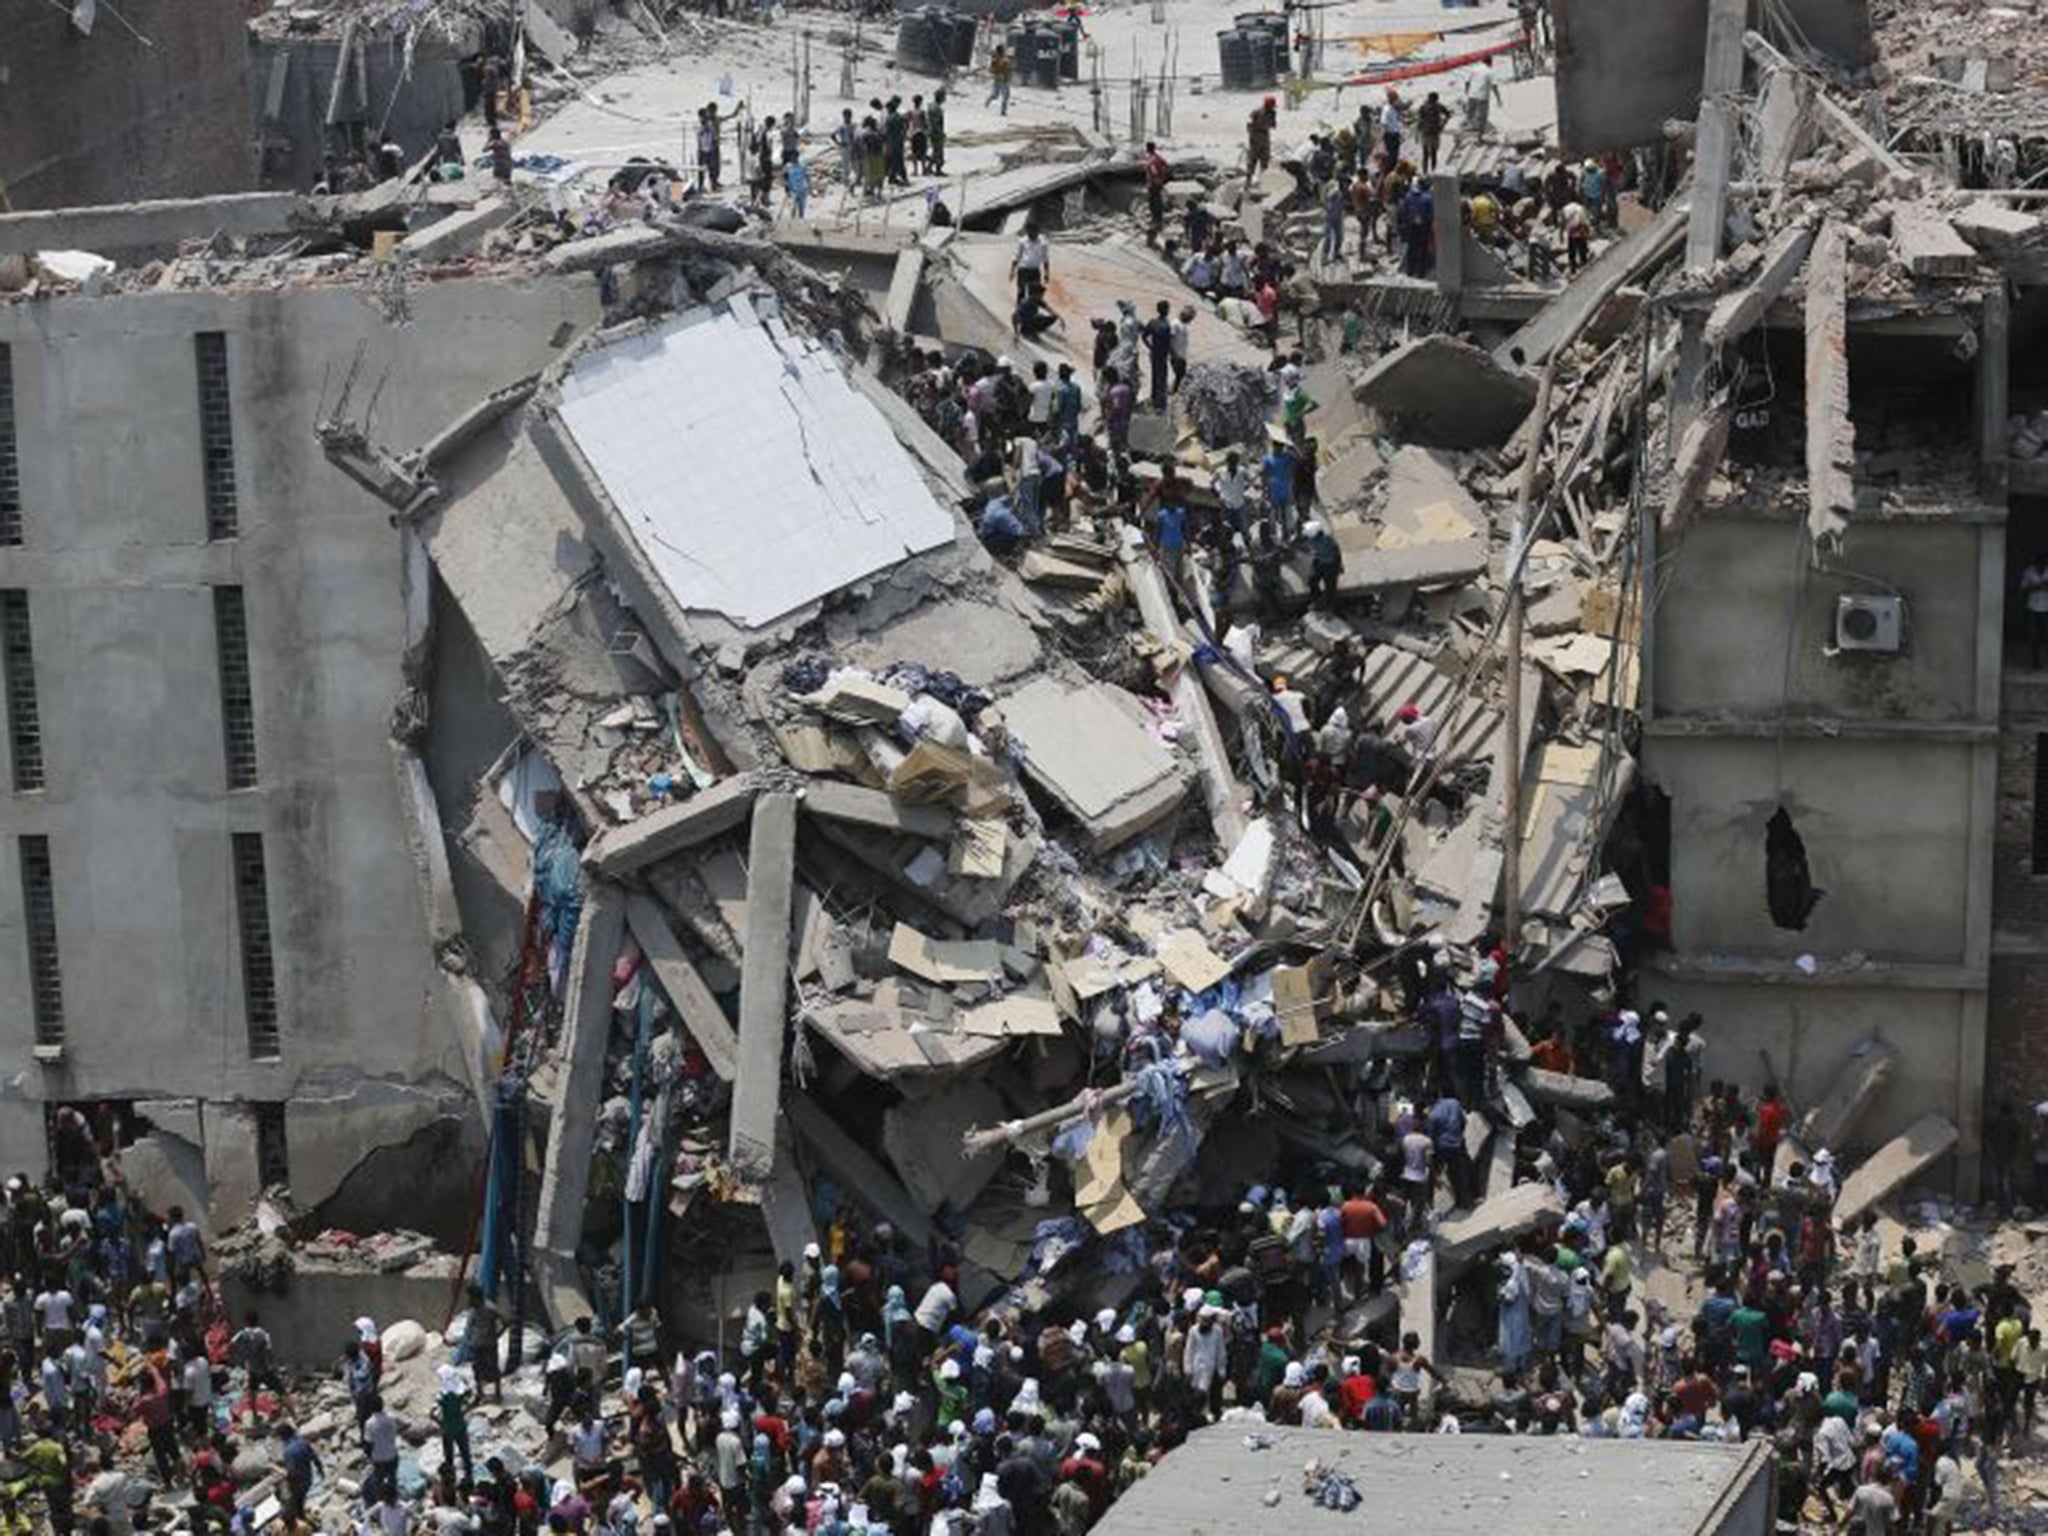 Human cost: Dhaka’s Rana Plaza factory collapse in 2013, killing 1,138 people